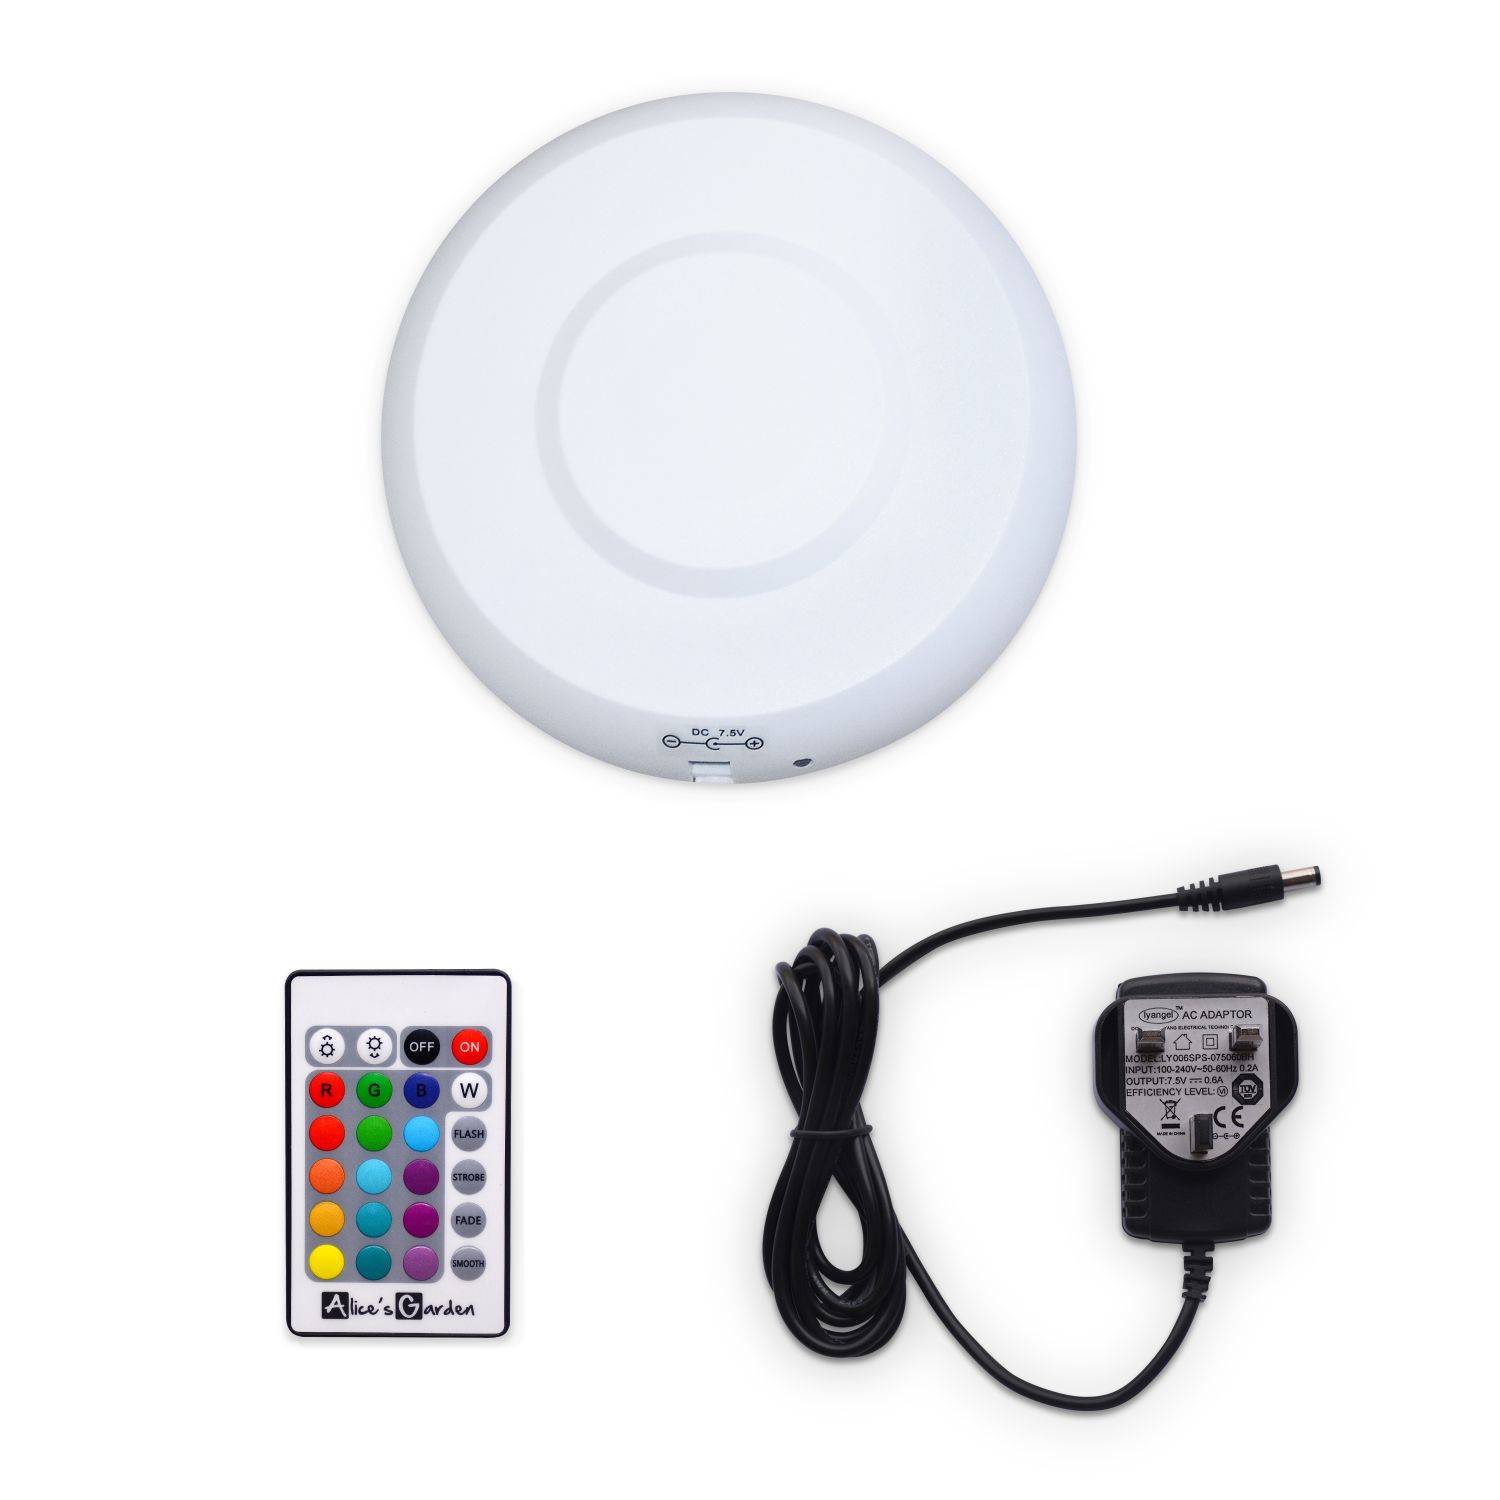 Wireless Outdoor LED Ball Light - 60cm, 16 colours Photo3